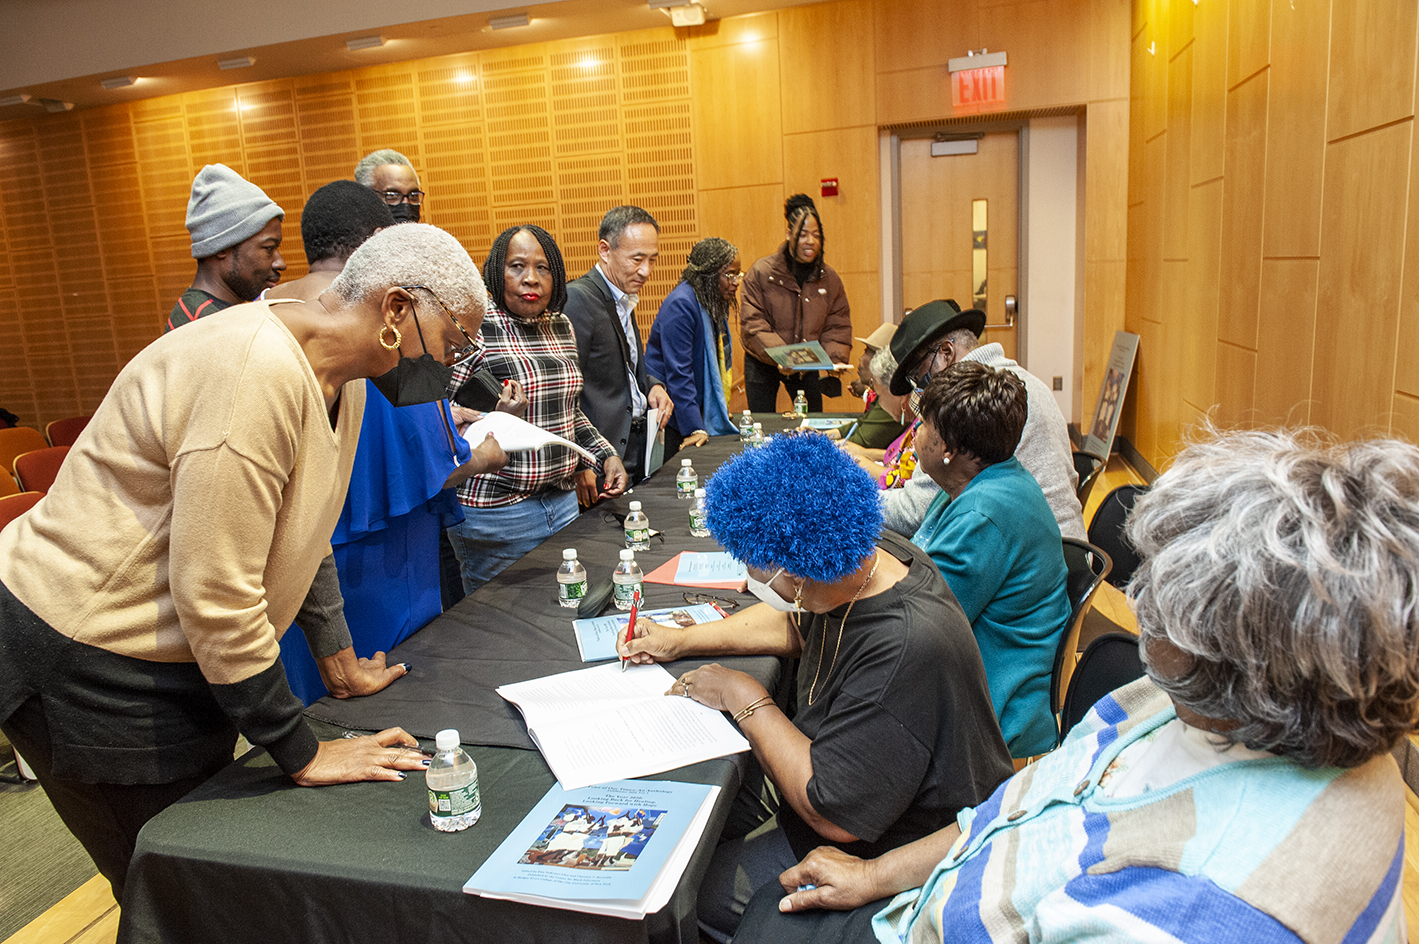 Tales of Our Times Anthology Book Launch at Medgar Evers College, December 2022. Members of the Dr. Edith Rock Writing Workshop for Elders Sign Books.